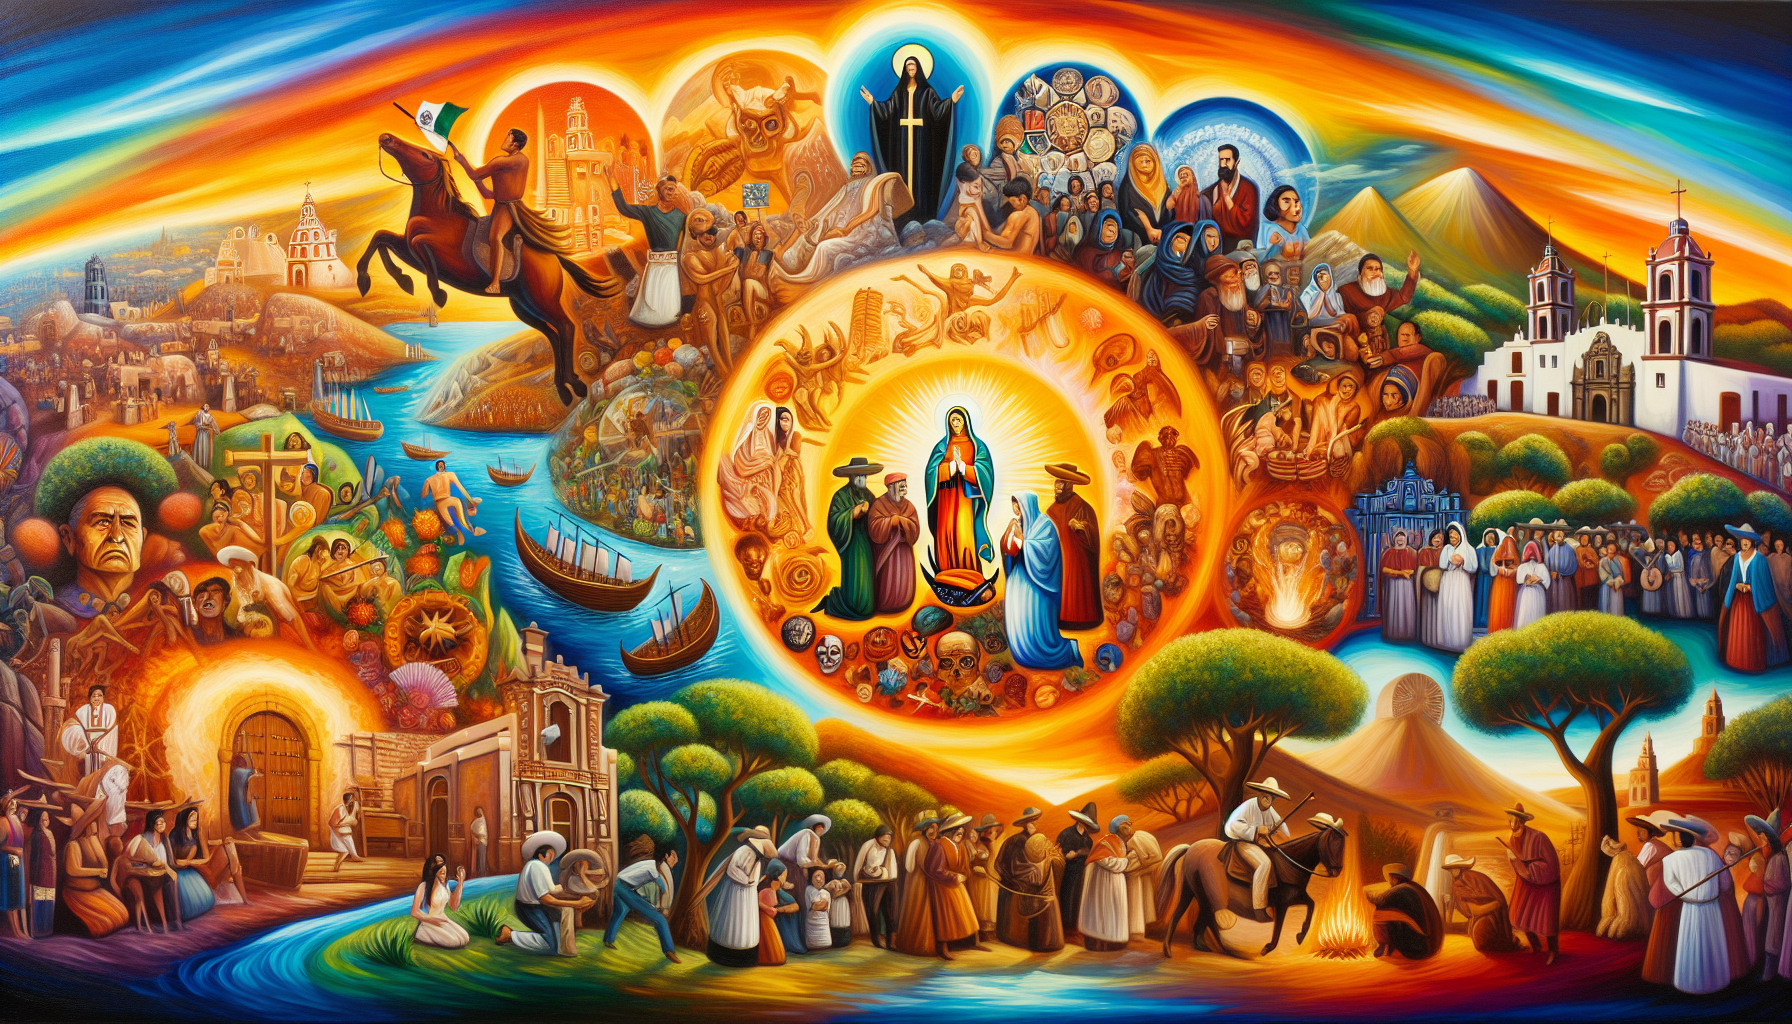 Colorful painting depicting a montage of historical scenes showing the evolution of Christianity in Mexico, including indigenous influences, Spanish missionaries, and modern religious practices, set i